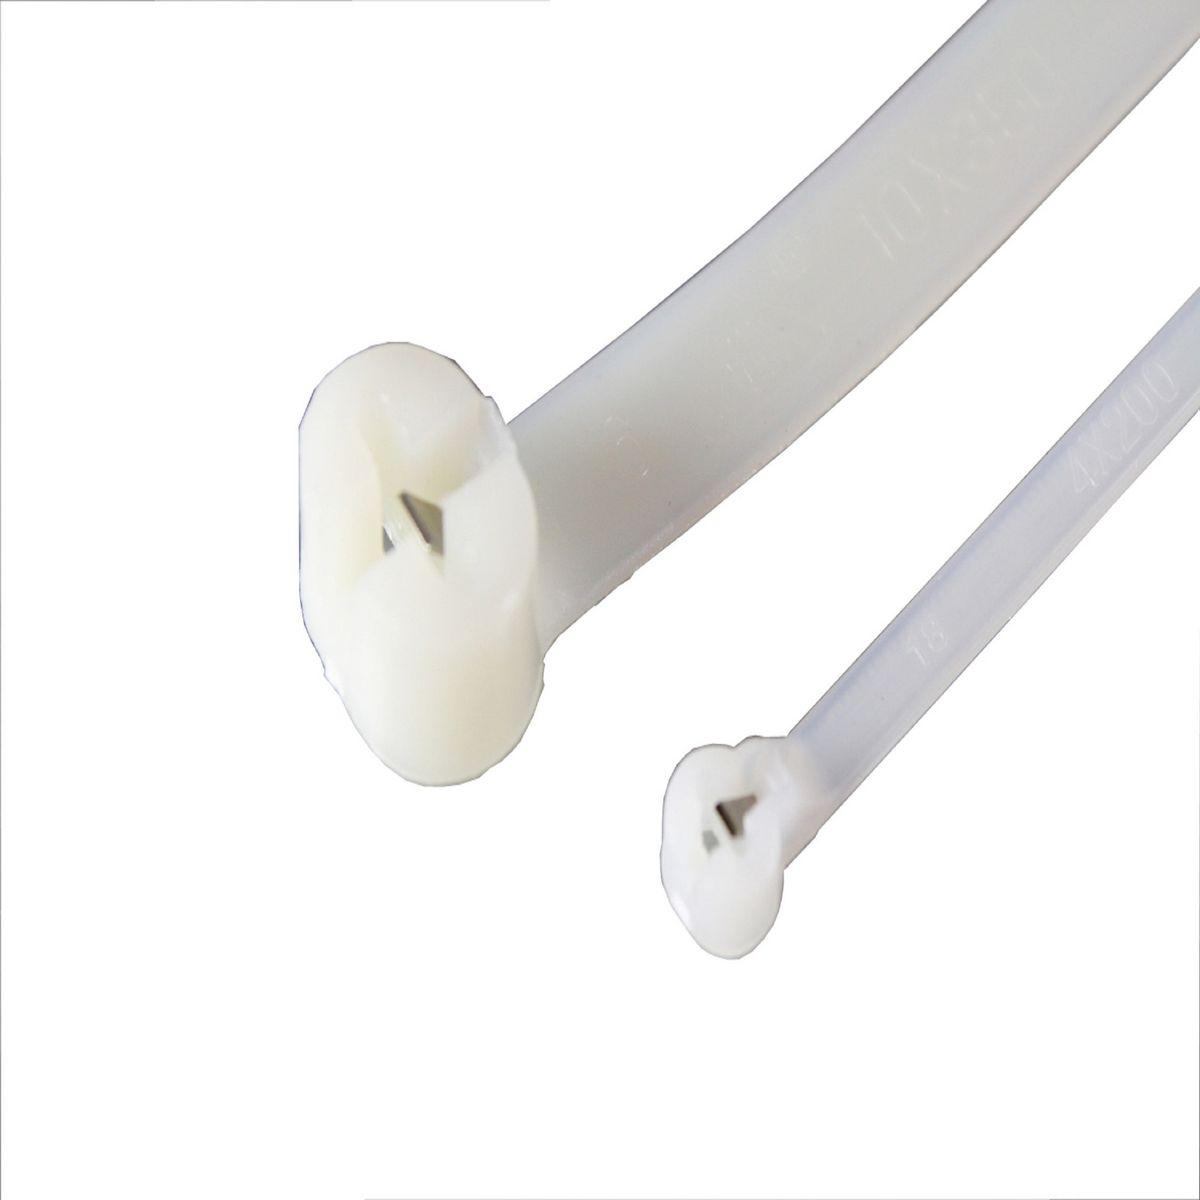 Hubbell CT50400SSBC Nylon 6/6 Cable Tie with Stainless steel Barb, 50 Lbs, Natural, 3.94" Bundle Dia., Package: 100.  ; Stainless Steel Barb Tie ; Nylon 6/6 Standard, Self-locking stainless steel barb, Maximum strength and adjustability for versatility, Chemically resistant 